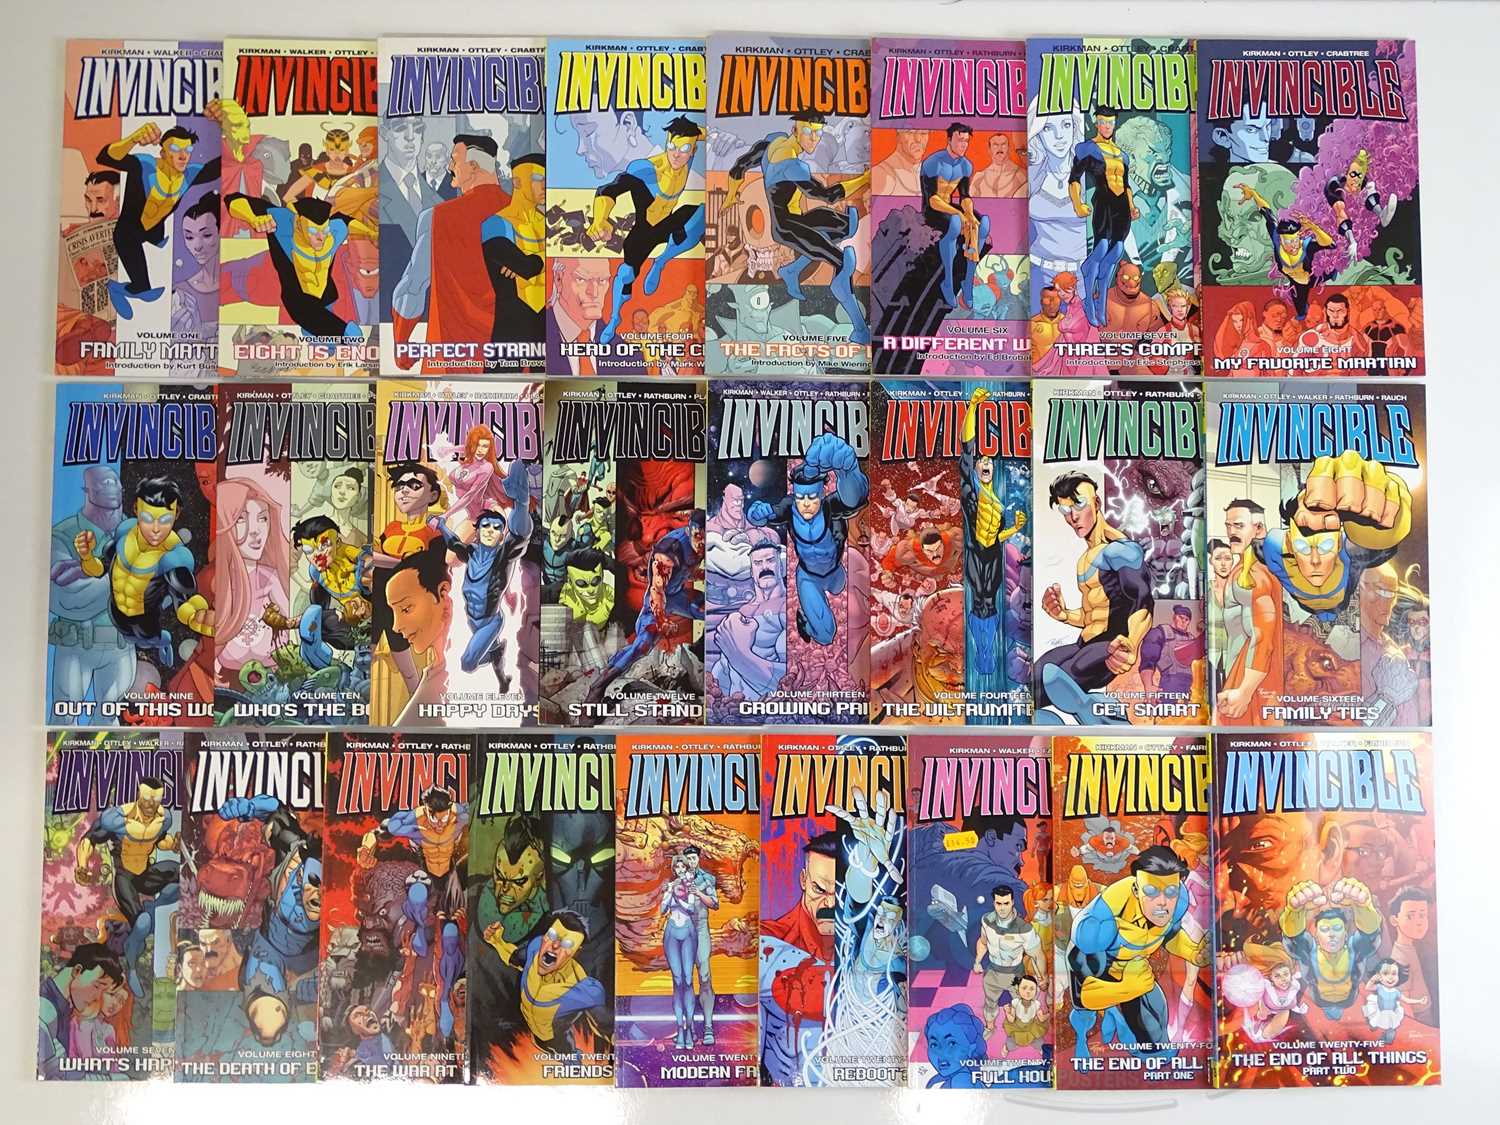 INVINCIBLE LOT (25 in Lot) - (2008/2010 - IMAGE) Includes Issues #1, 2, 3, 4, 5, 6, 7, 8, 9, 10, 11,